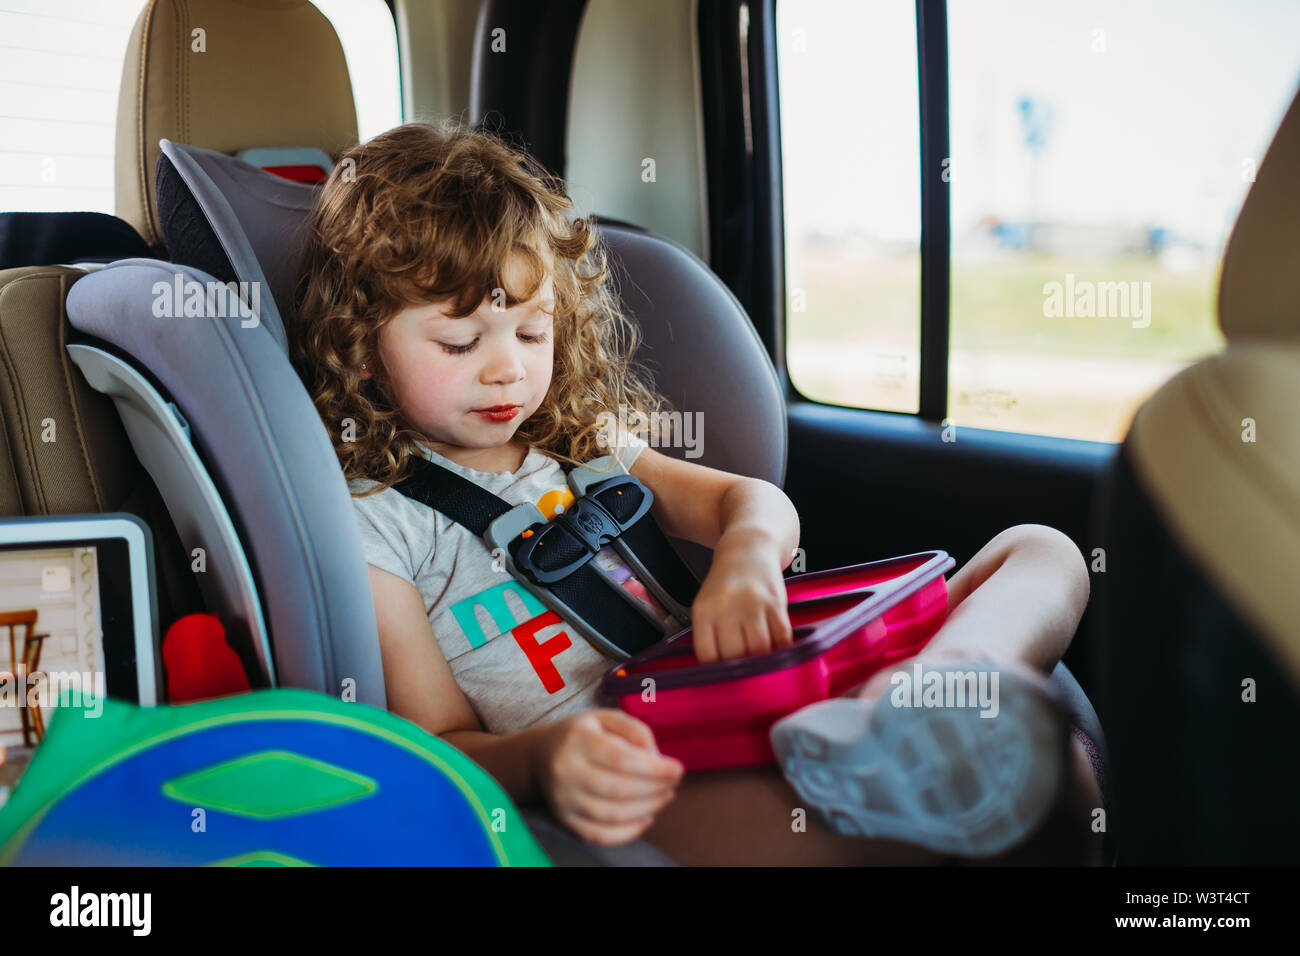 Young girl sitting in a car seat and eating lunch on a road trip Stock Photo